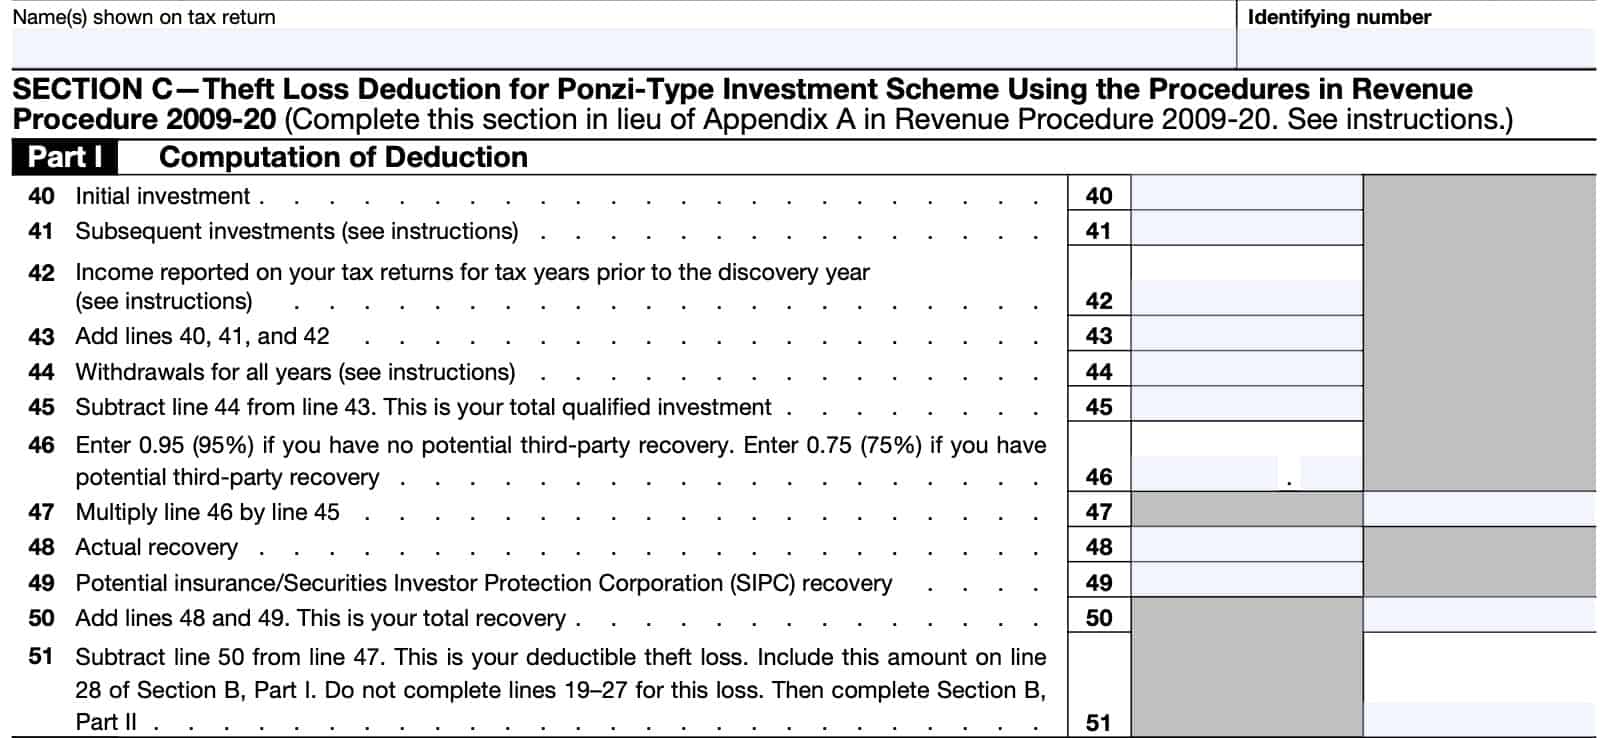 irs form 4684, casualty and thefts, section c-theft loss deduction for ponzi-type investment scheme using procedures in revenue procedure 2009-20, part i: computation of deduction